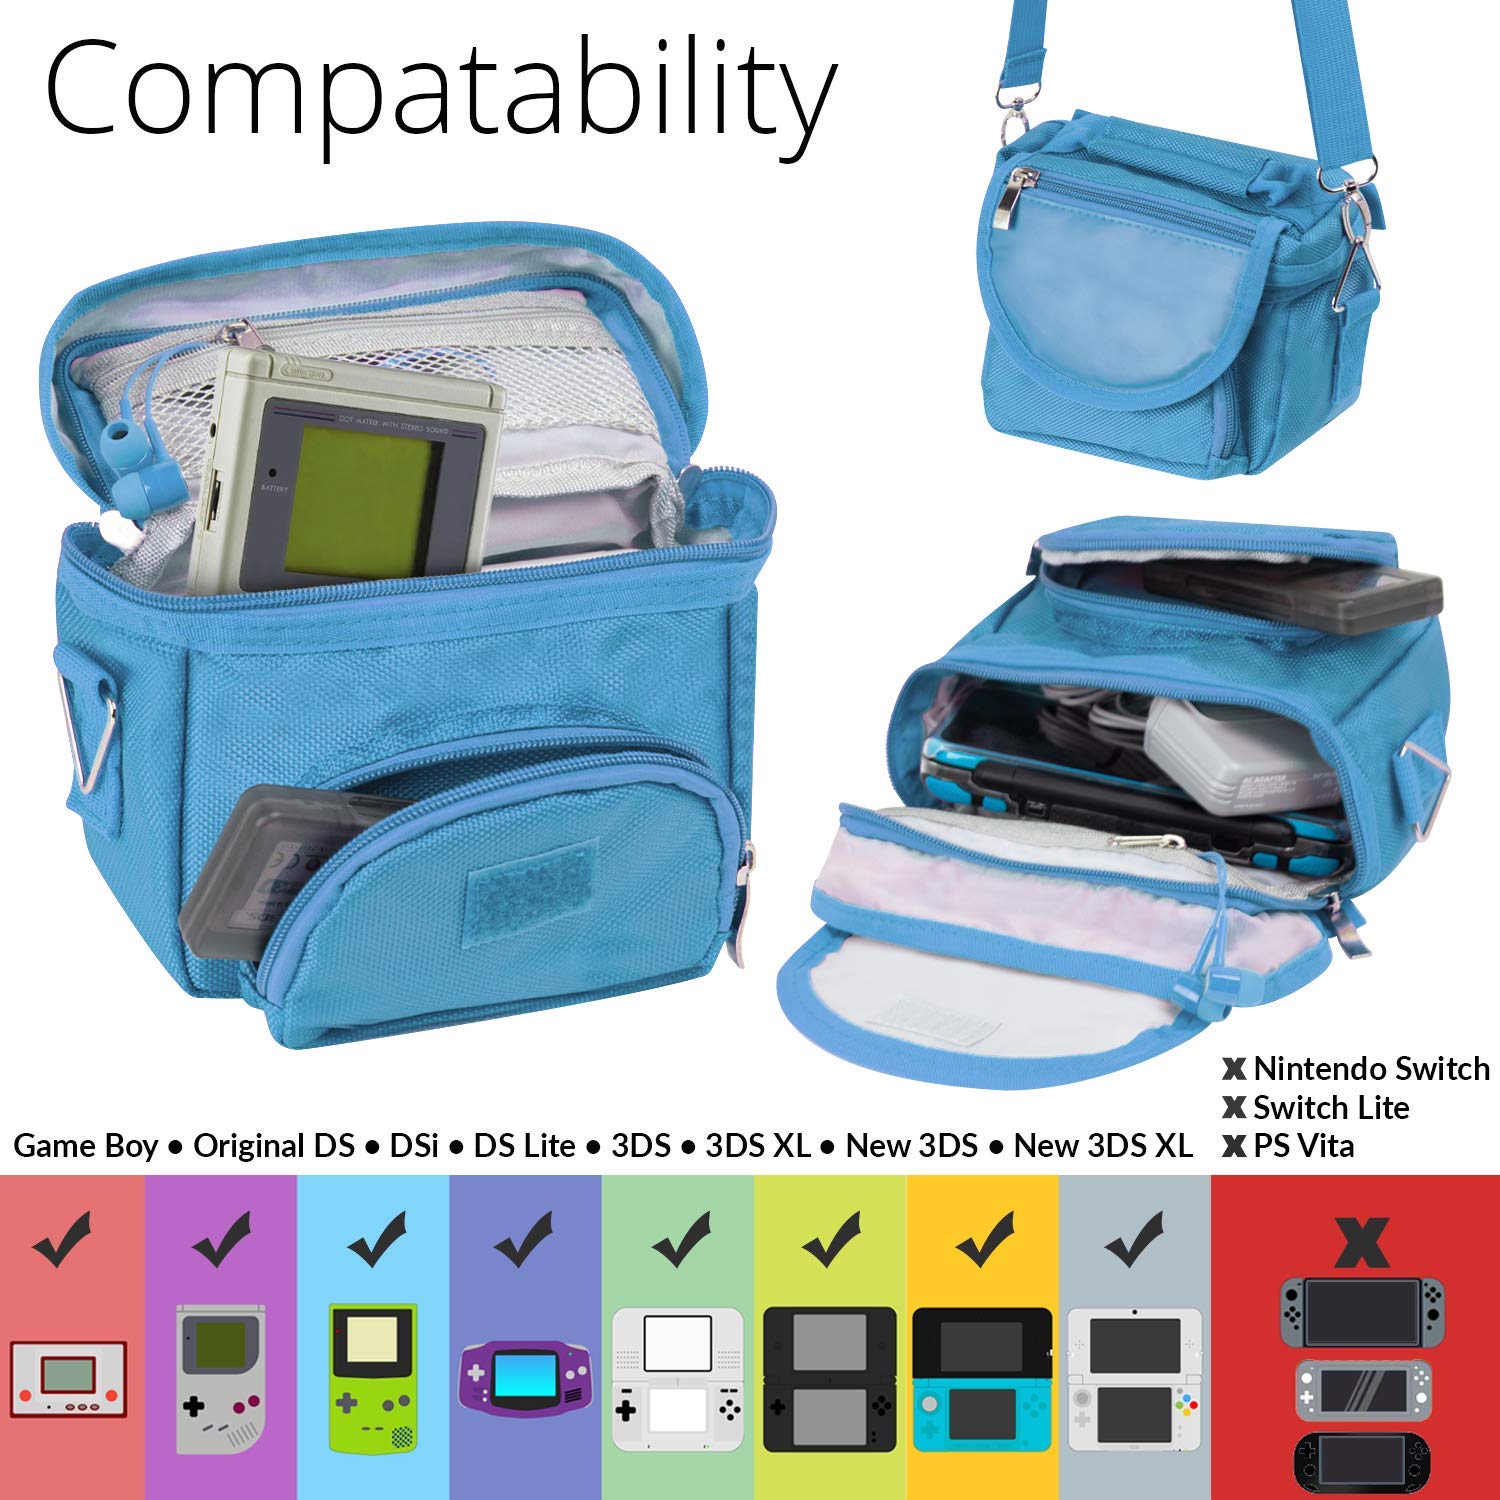 G-HUB game and Console Travel Bag for Nintendo DS Consoles with Shoulder Strap, Carry Handle, Belt Loop (Blue)